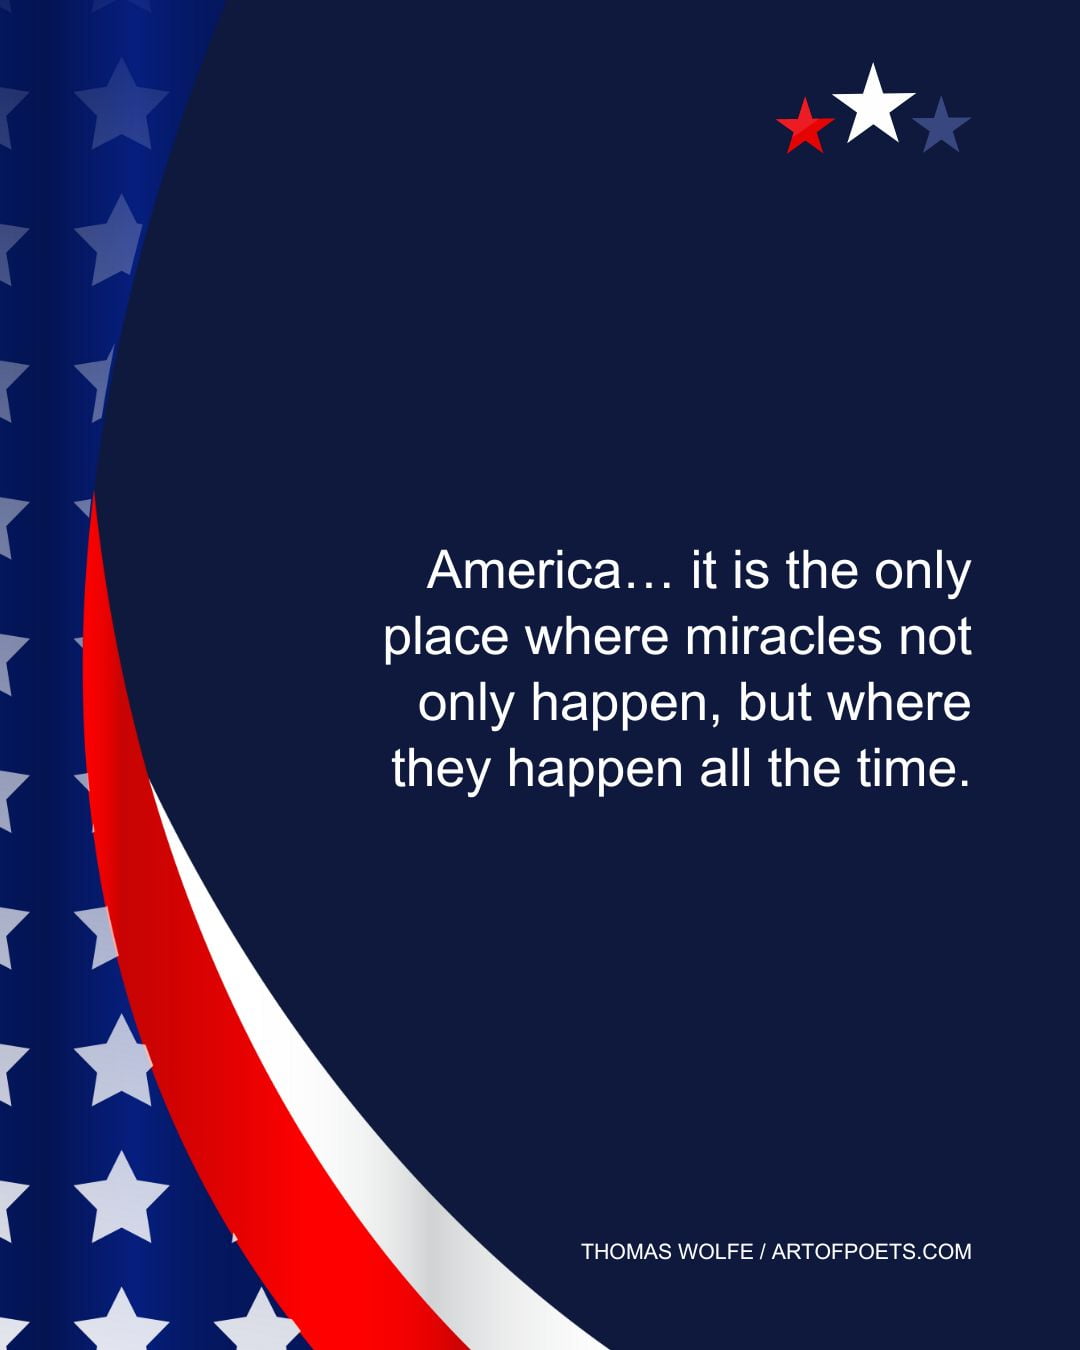 America… it is the only place where miracles not only happen but where they happen all the time